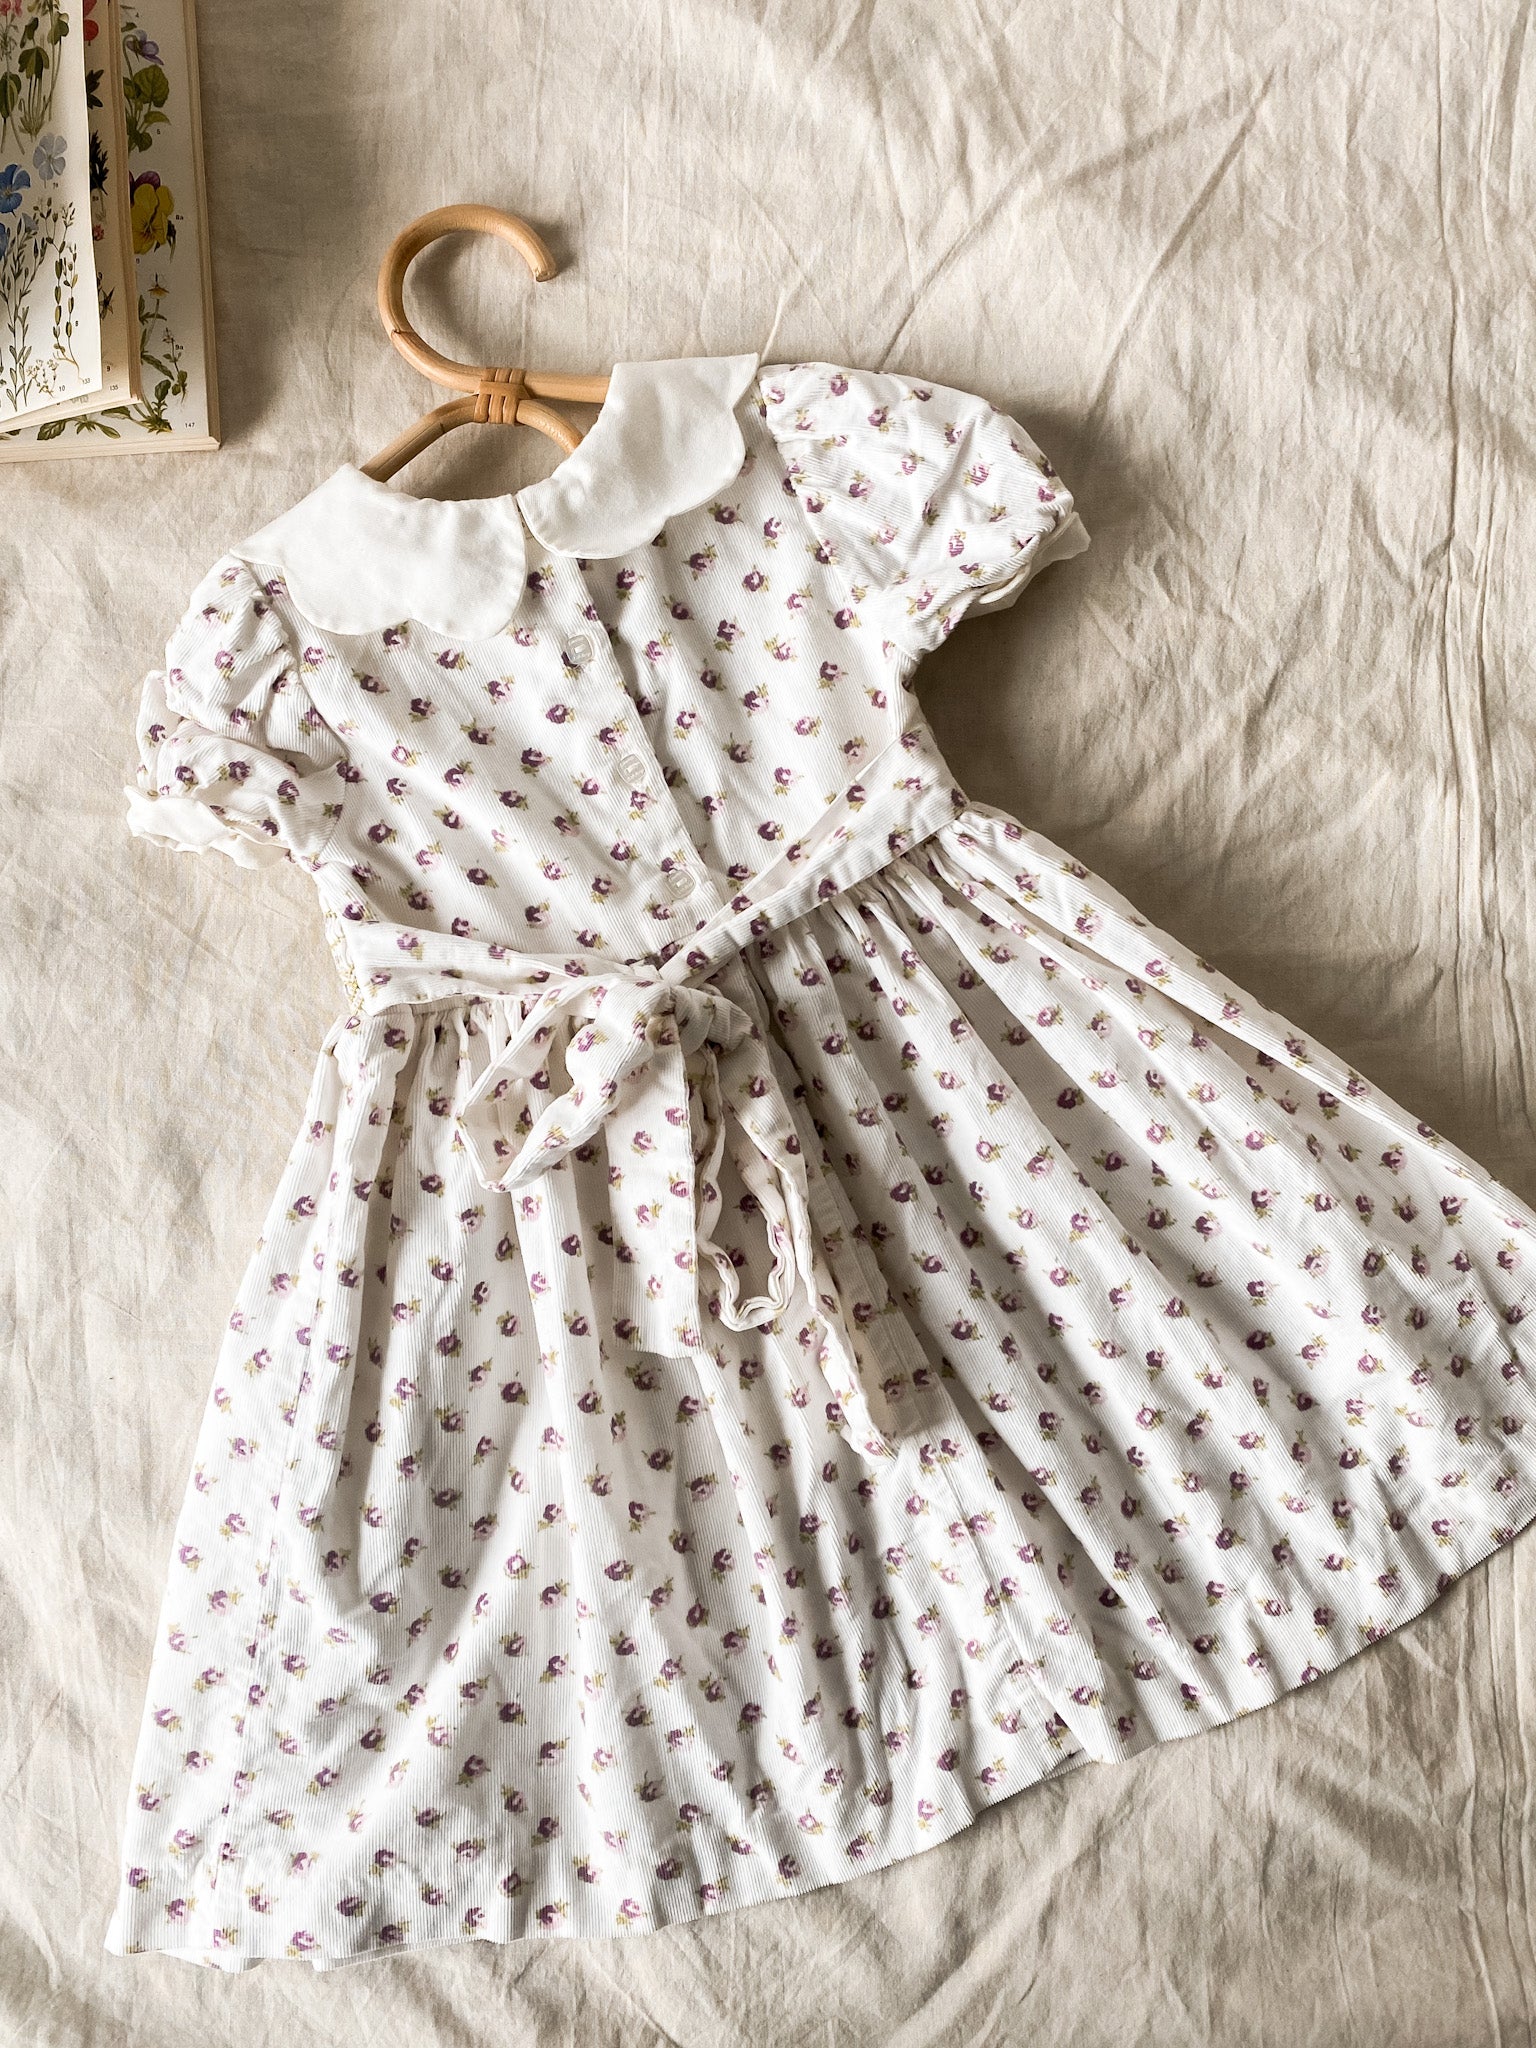 Vintage Laura Ashley Needlecord Smocked Dress, approx 3 years